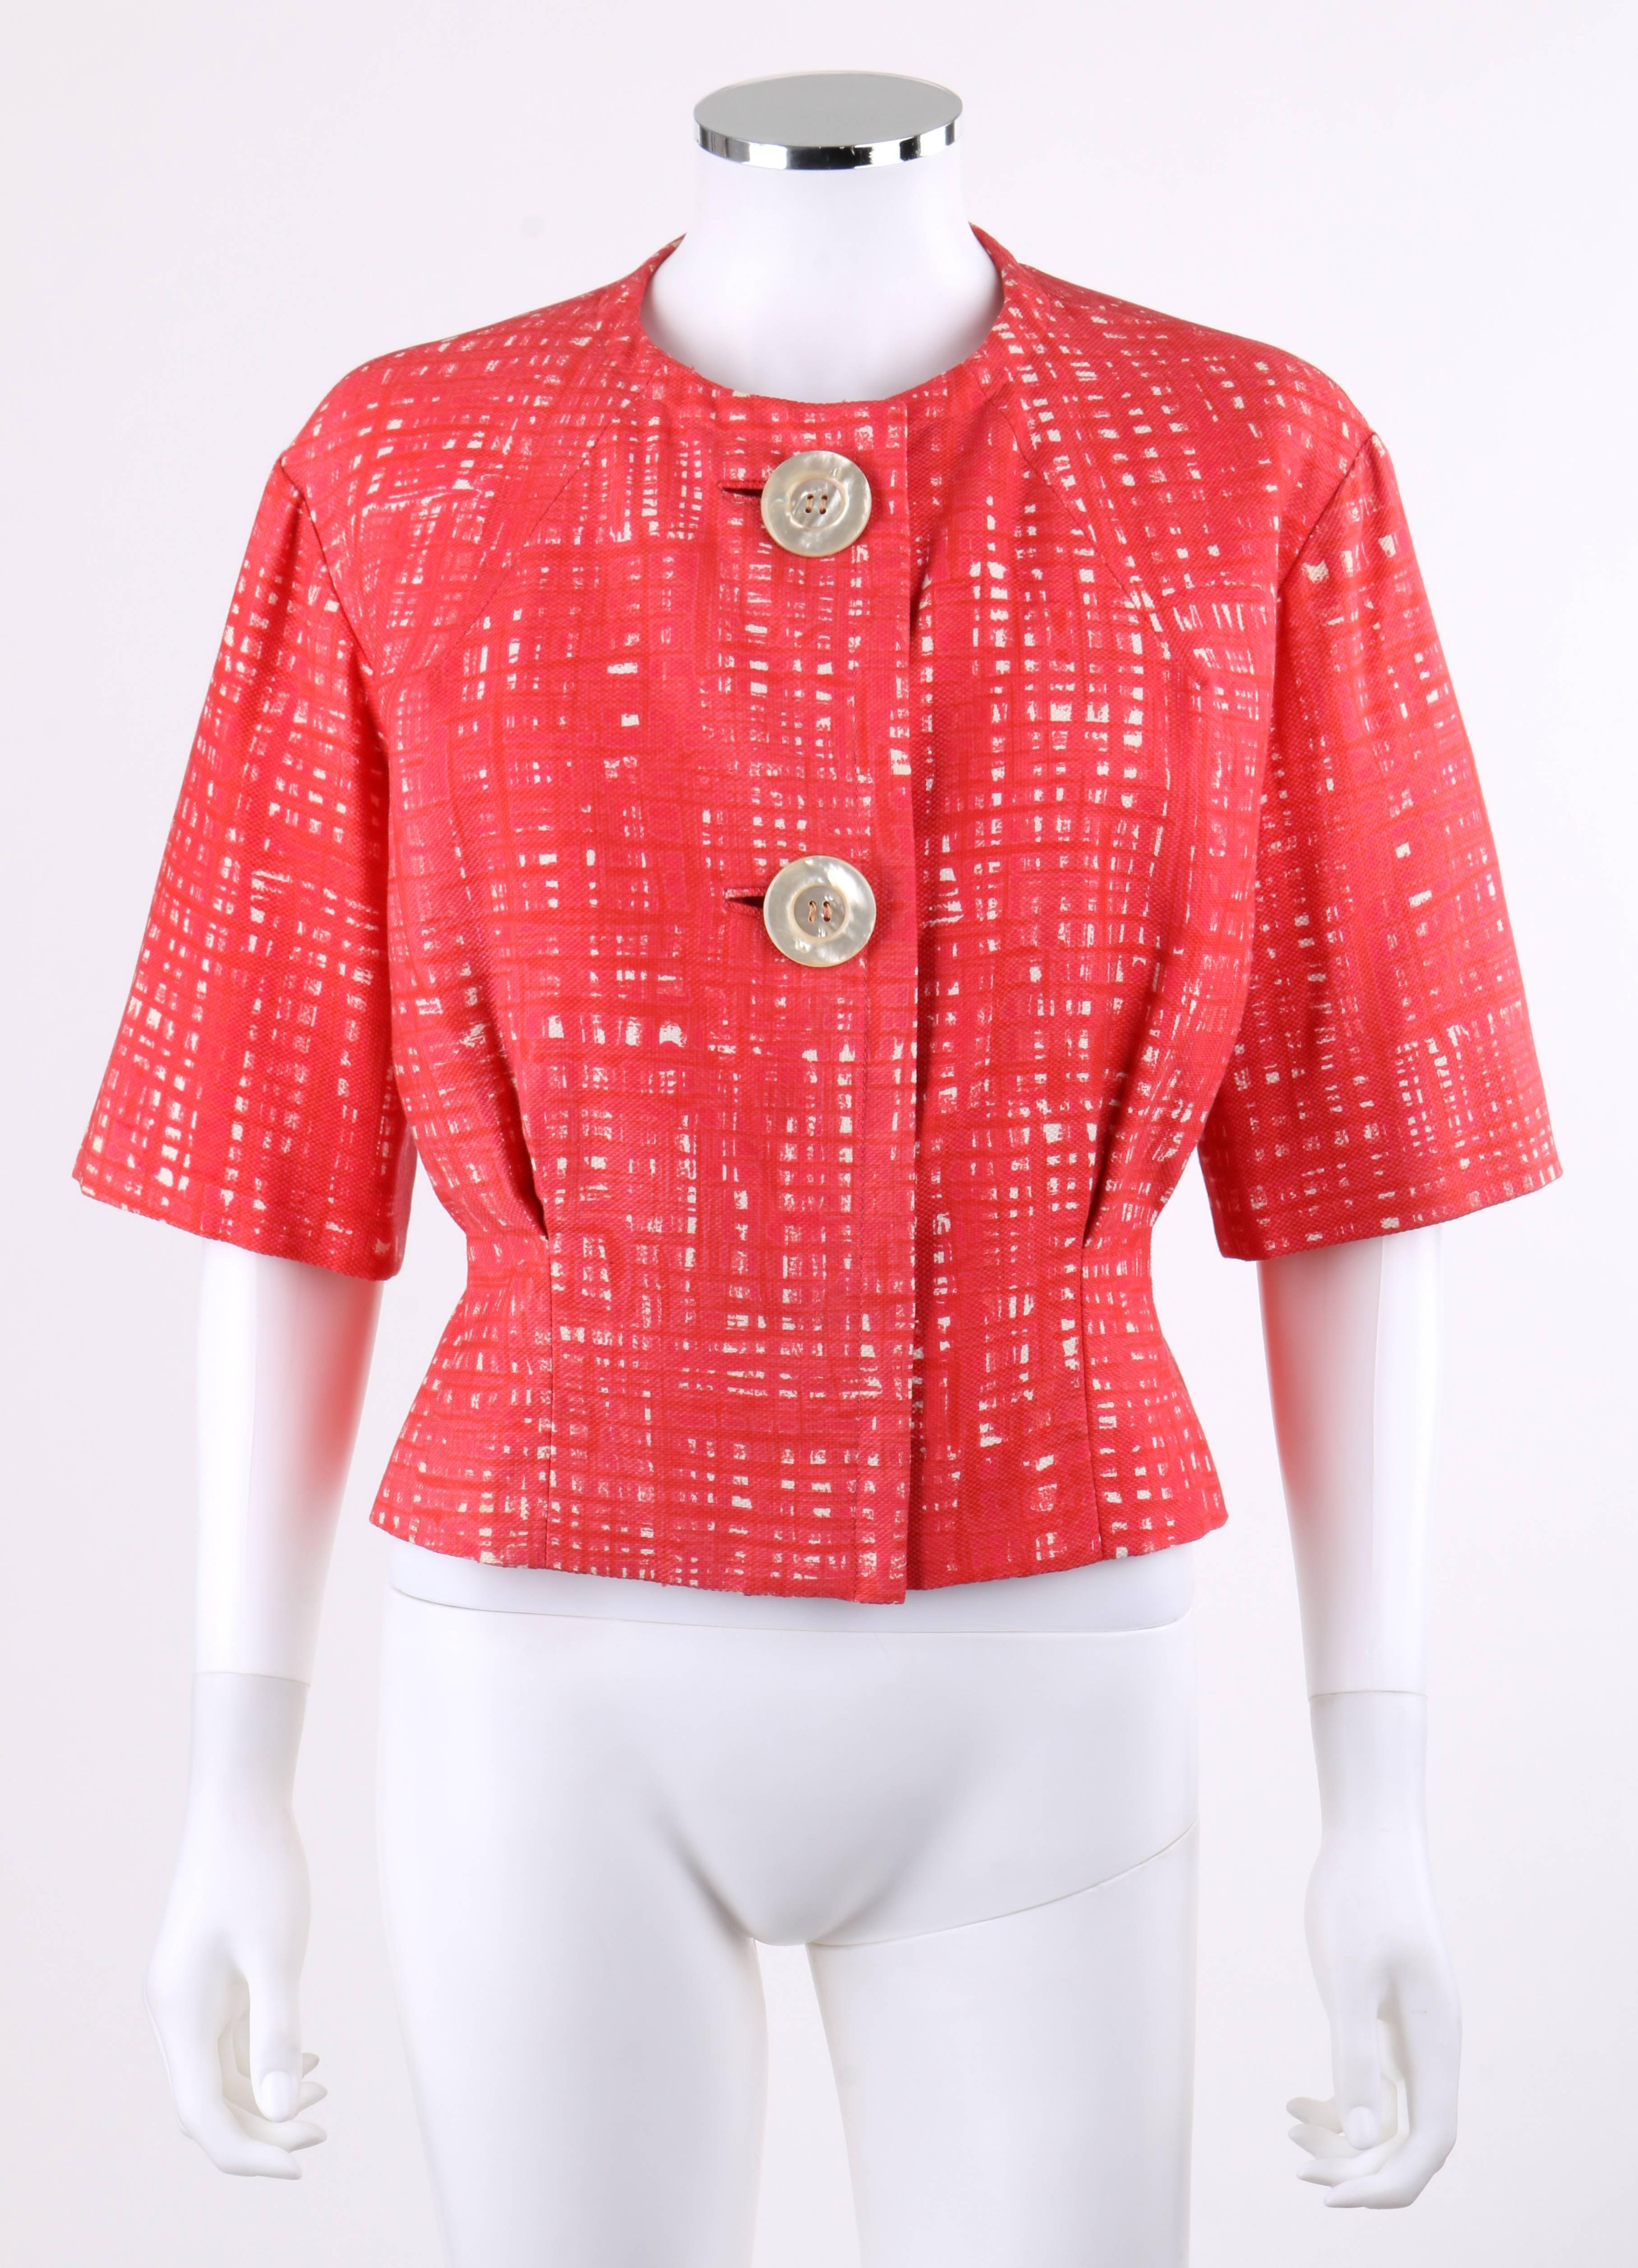 Vintage Eisa early 1960's pink cotton pique blazer and belt designed by Cristobal Balenciaga. Pink and white painterly check print cotton pique. Mid-length sleeve blazer. Crew neckline. Two center front over-sized white pearlescent button closures